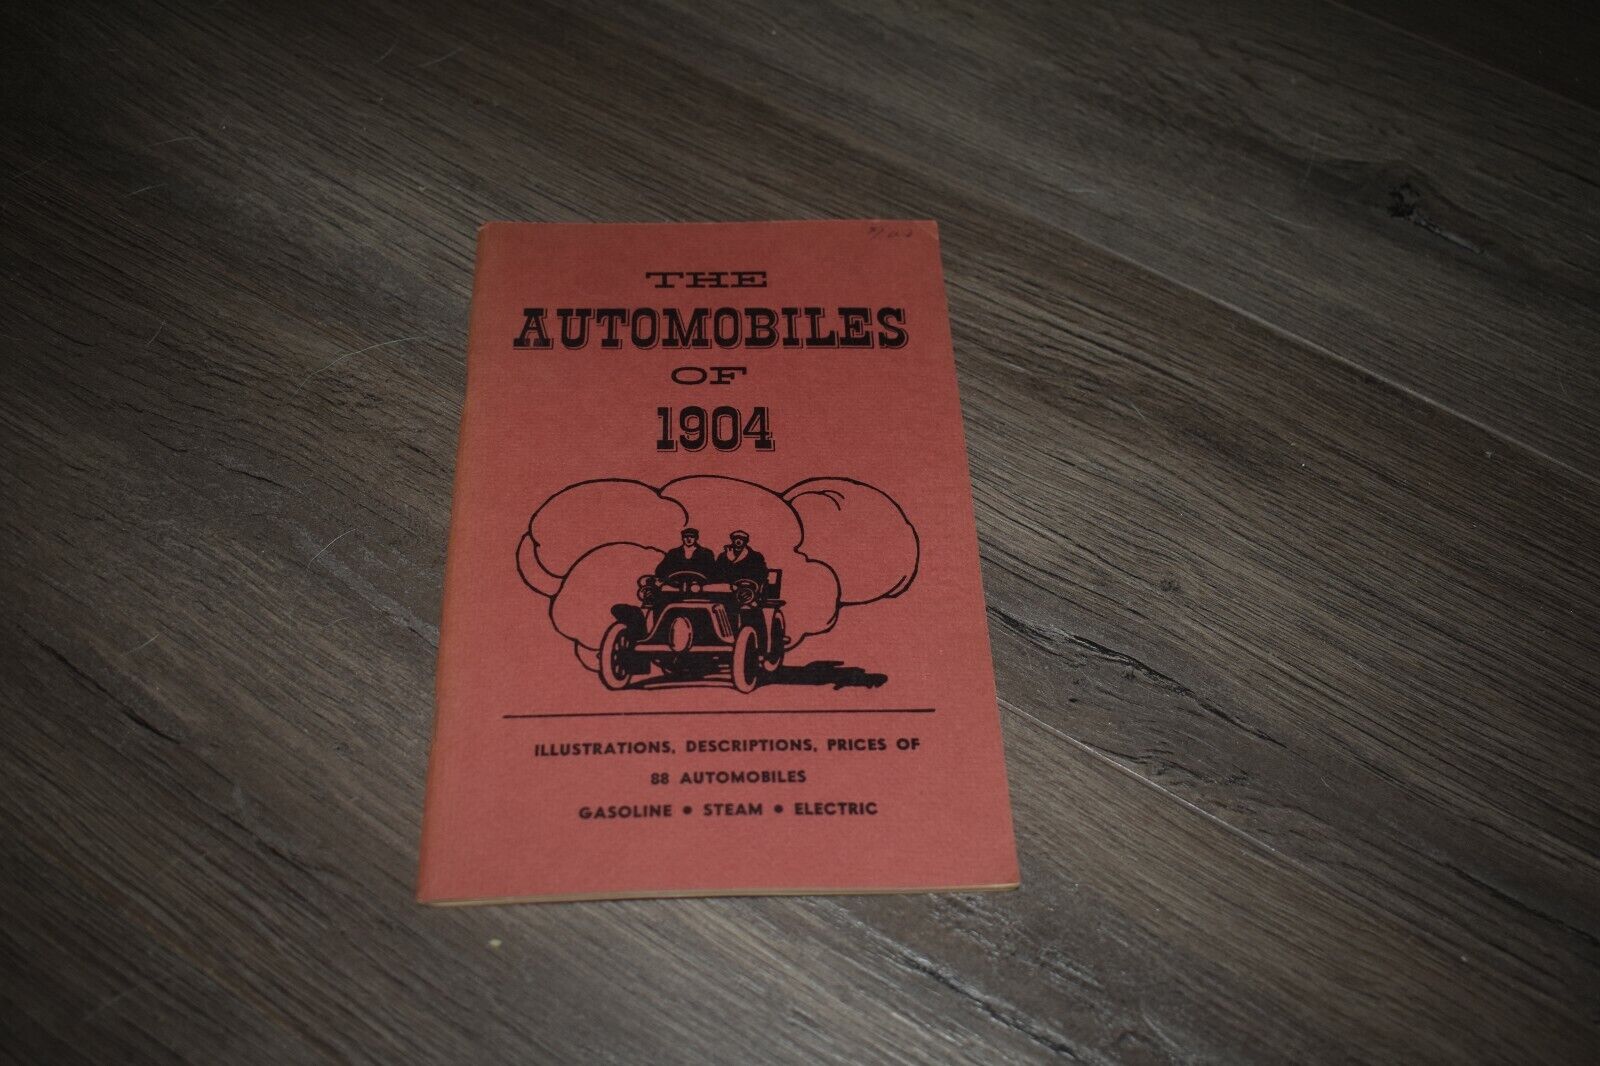 The Automobiles of 1904 reprinted from Frank Leslie's Popular Monthly 1961